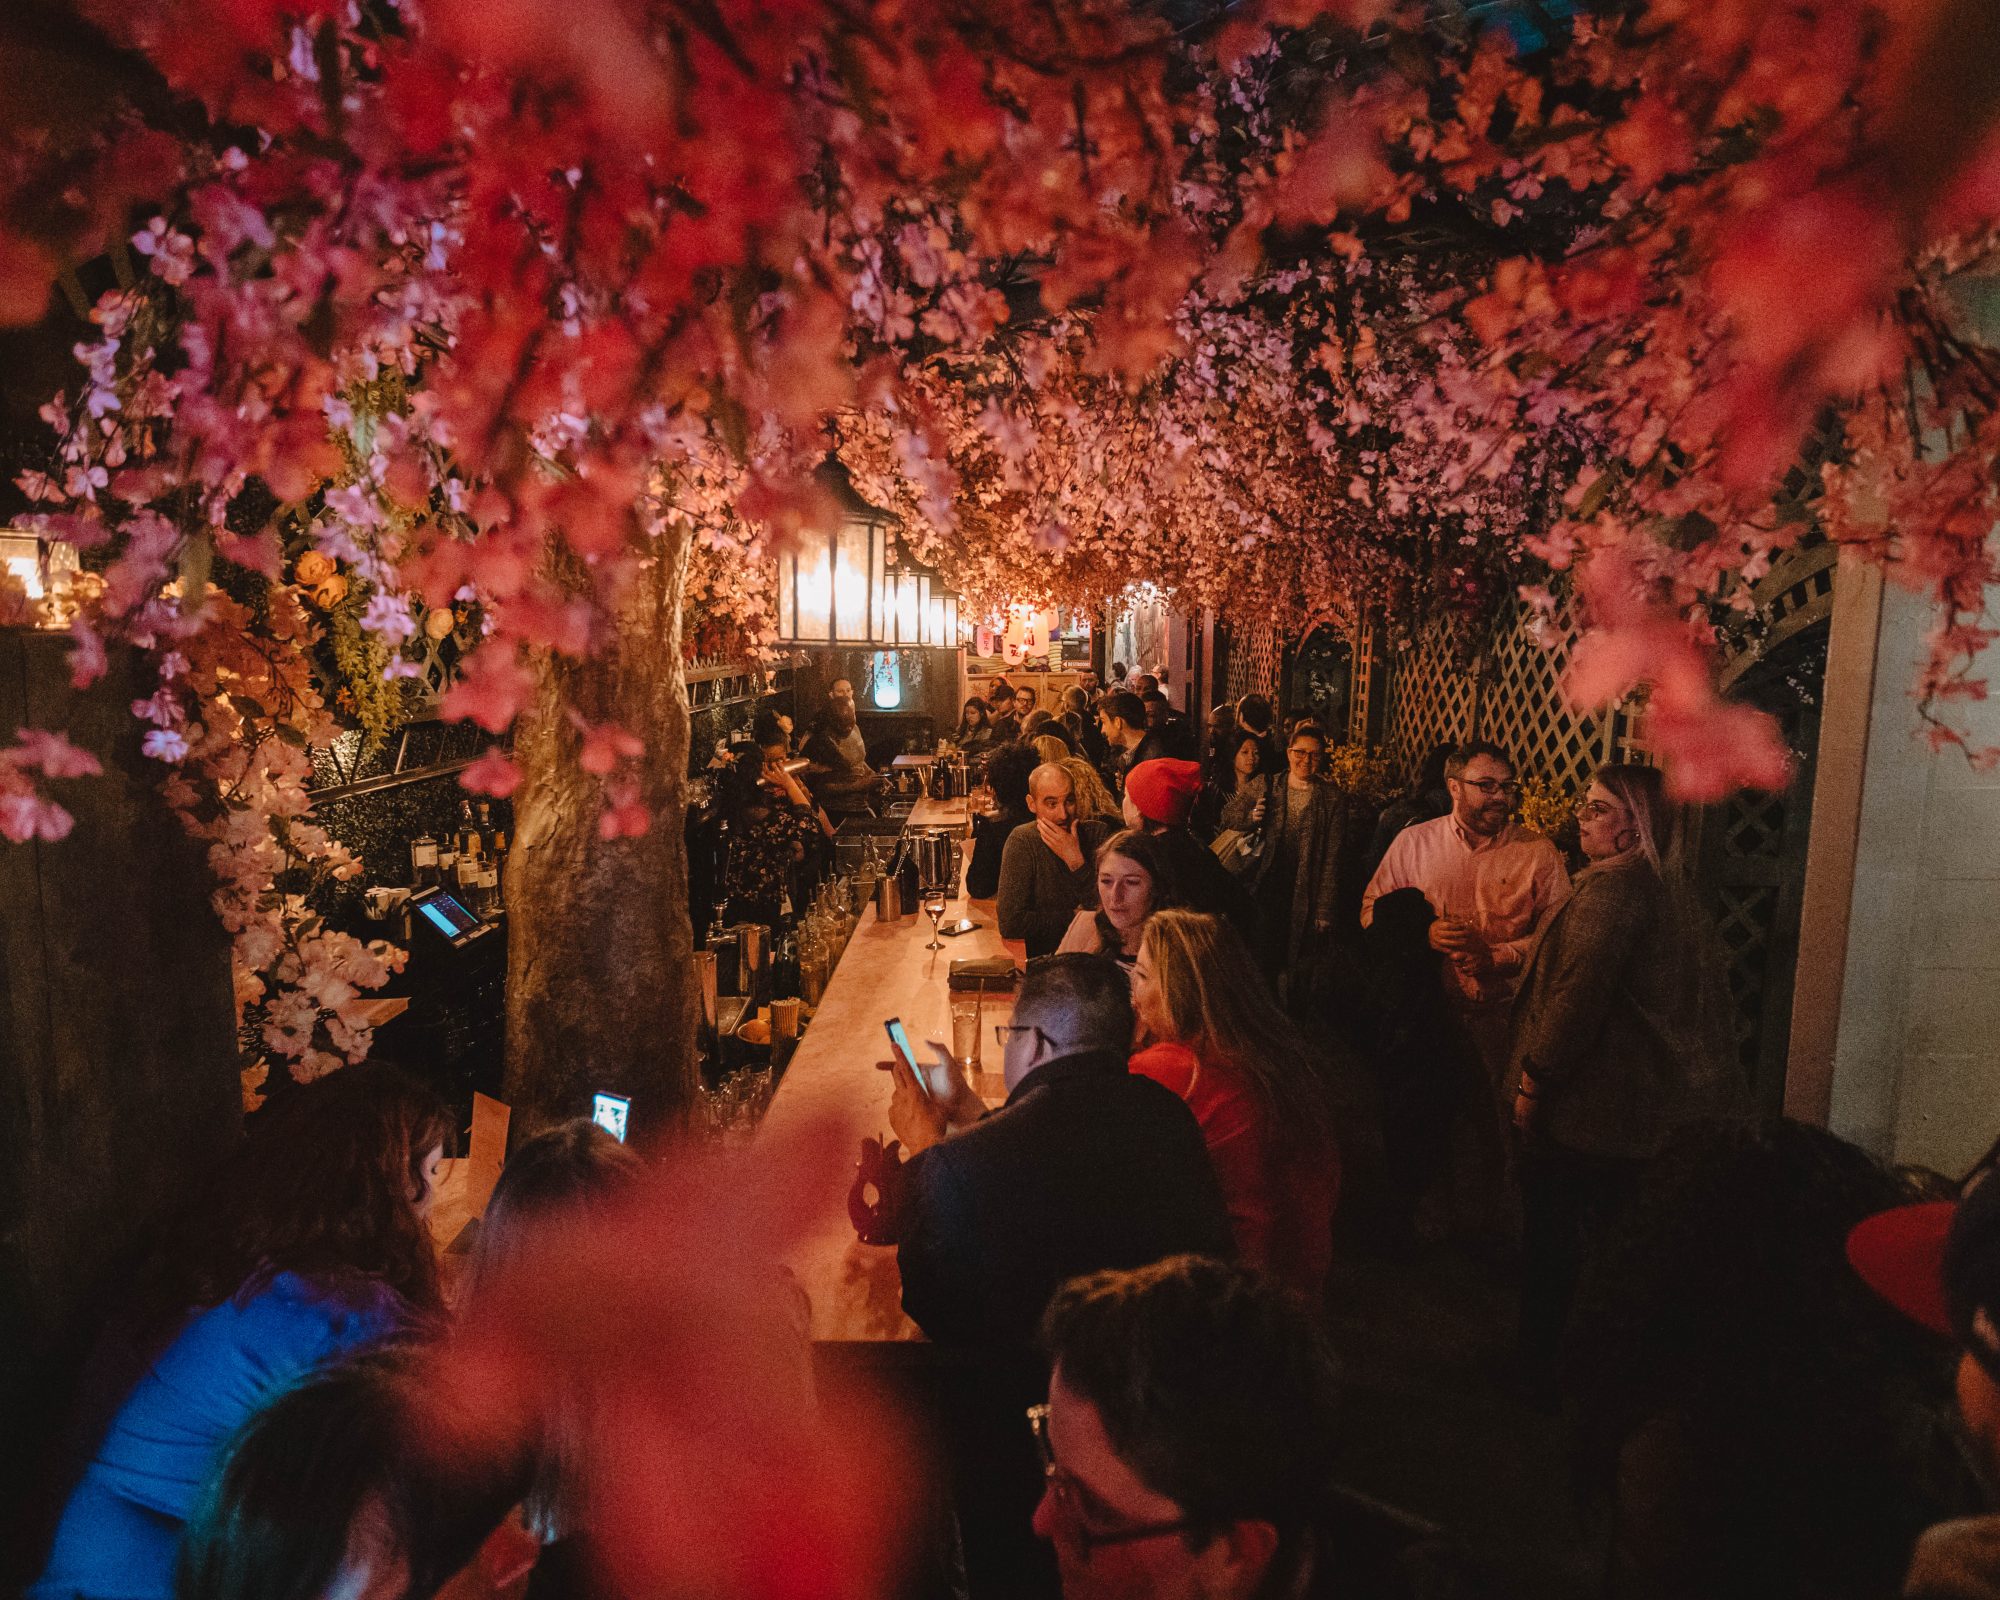 Photos of the Cherry Blossom Pop Up Bar in DC